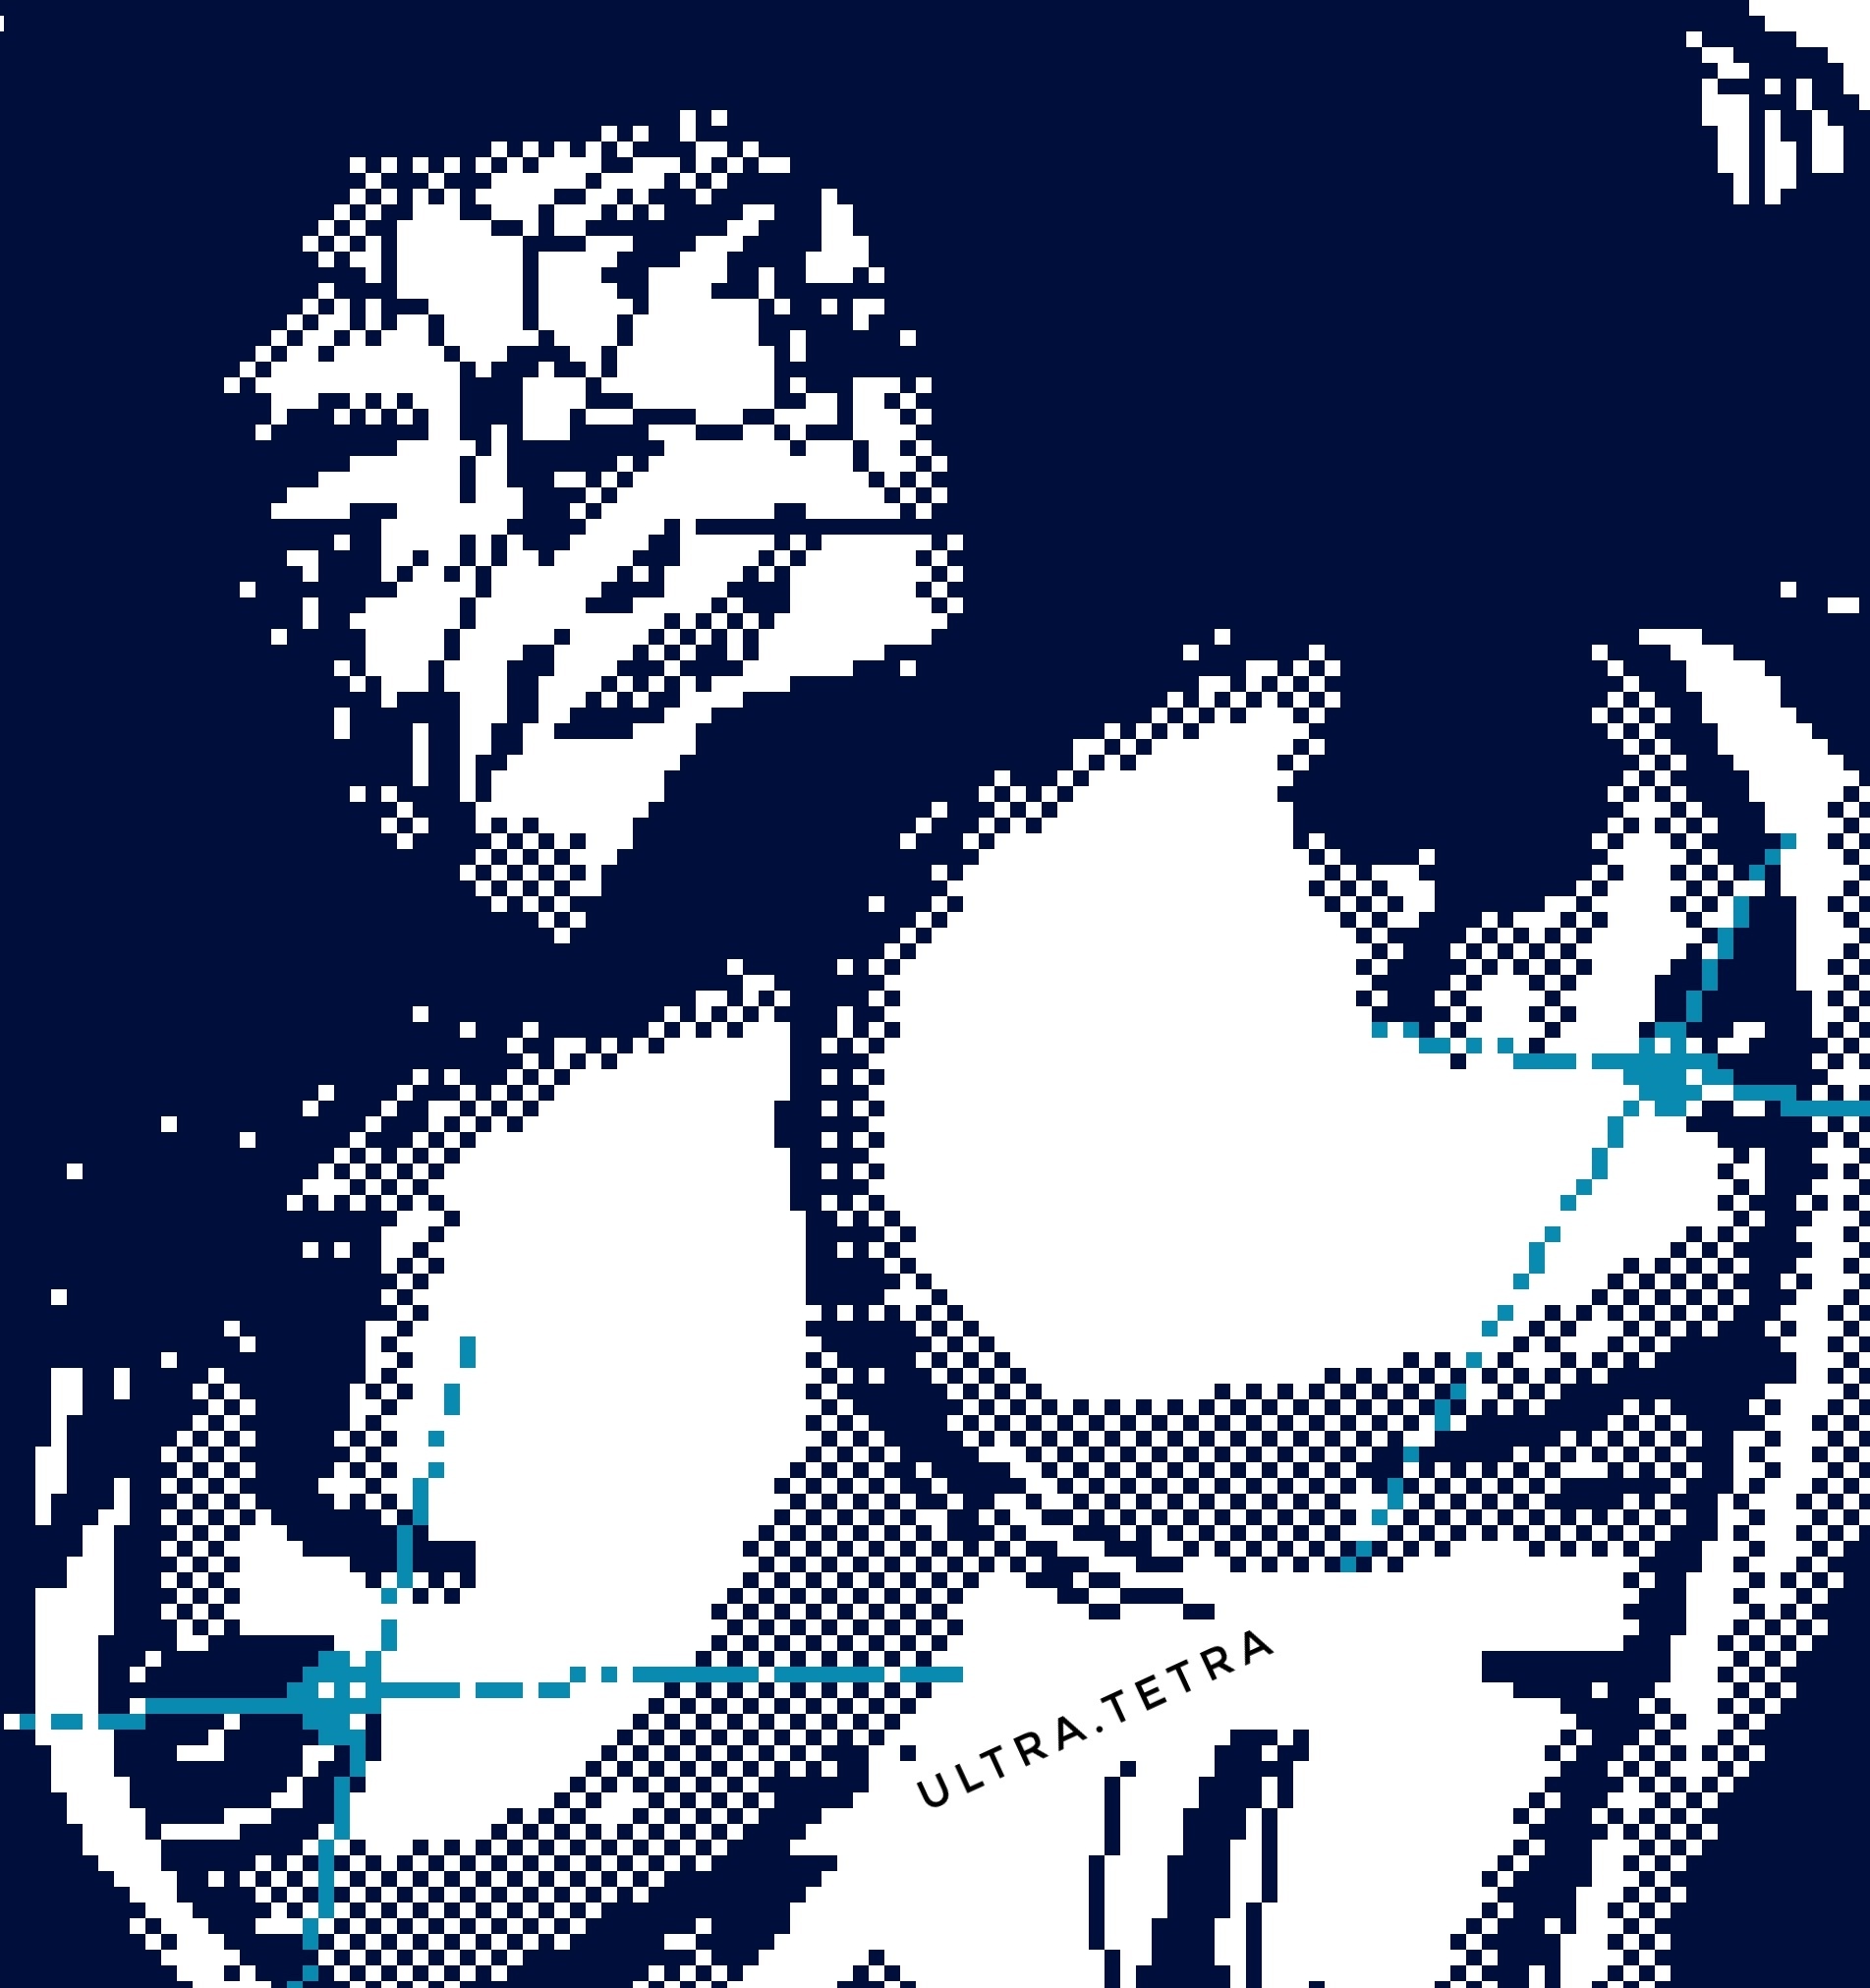 Pixel art of Metadata with his breasts exposed. He is looking down on the viewer.